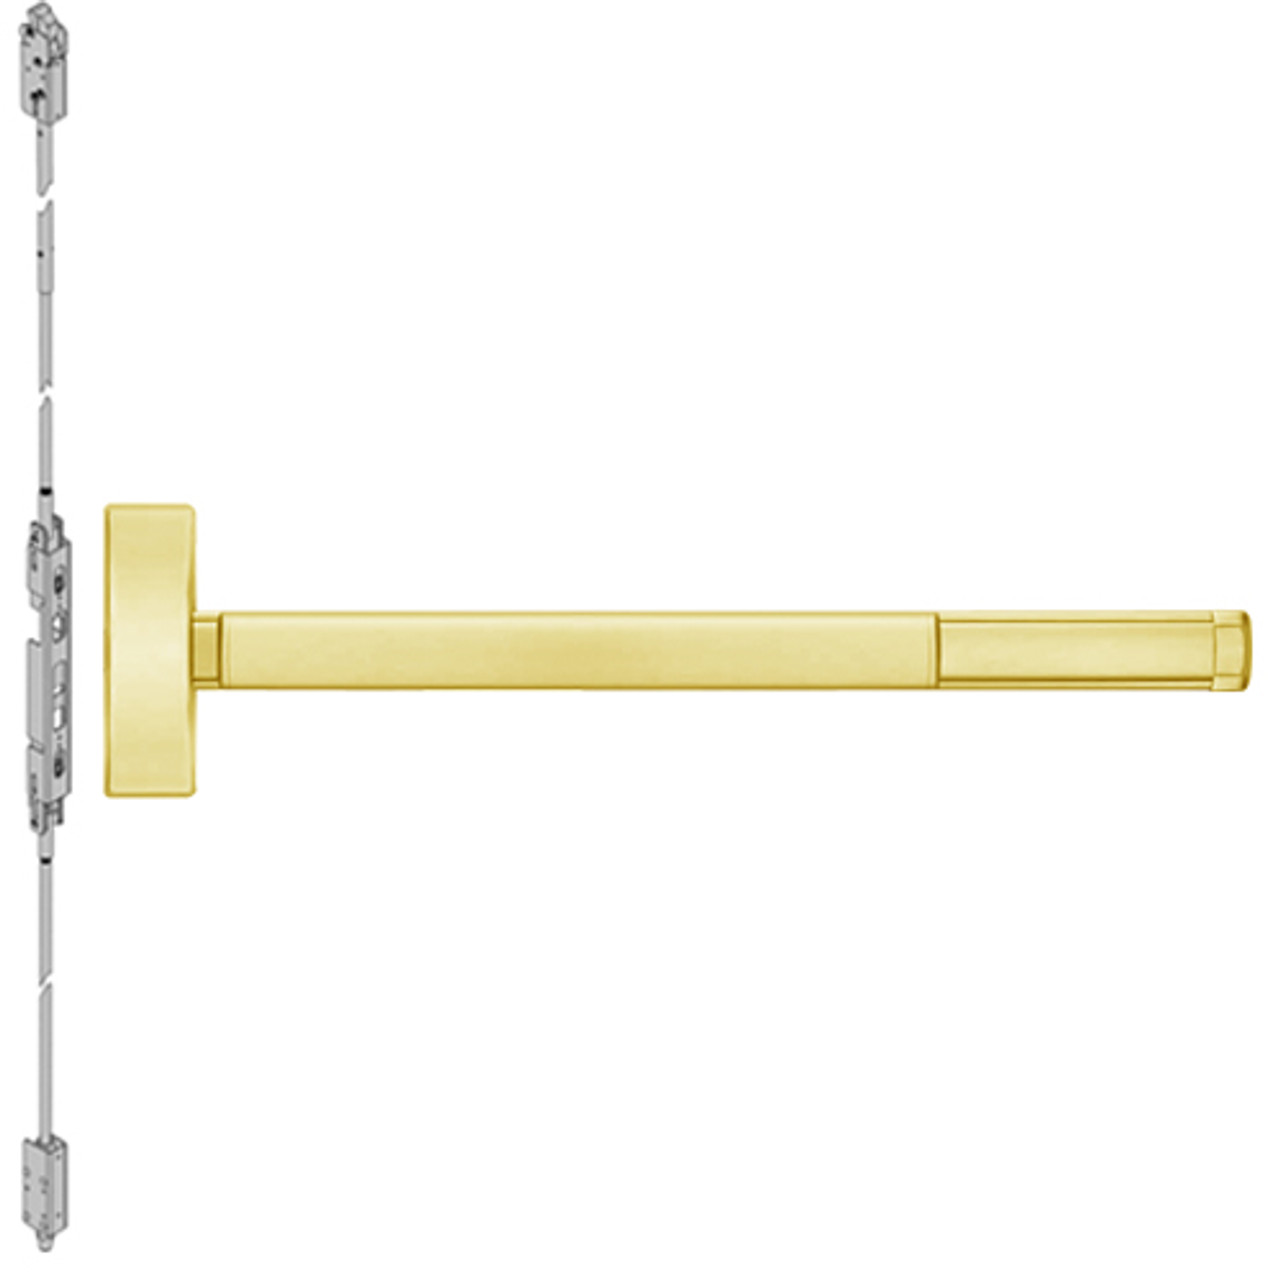 ELR2814-605-48 PHI 2800 Series Concealed Vertical Rod Exit Device with Electric Latch Retraction Prepped for Lever-Knob Always Active in Bright Brass Finish